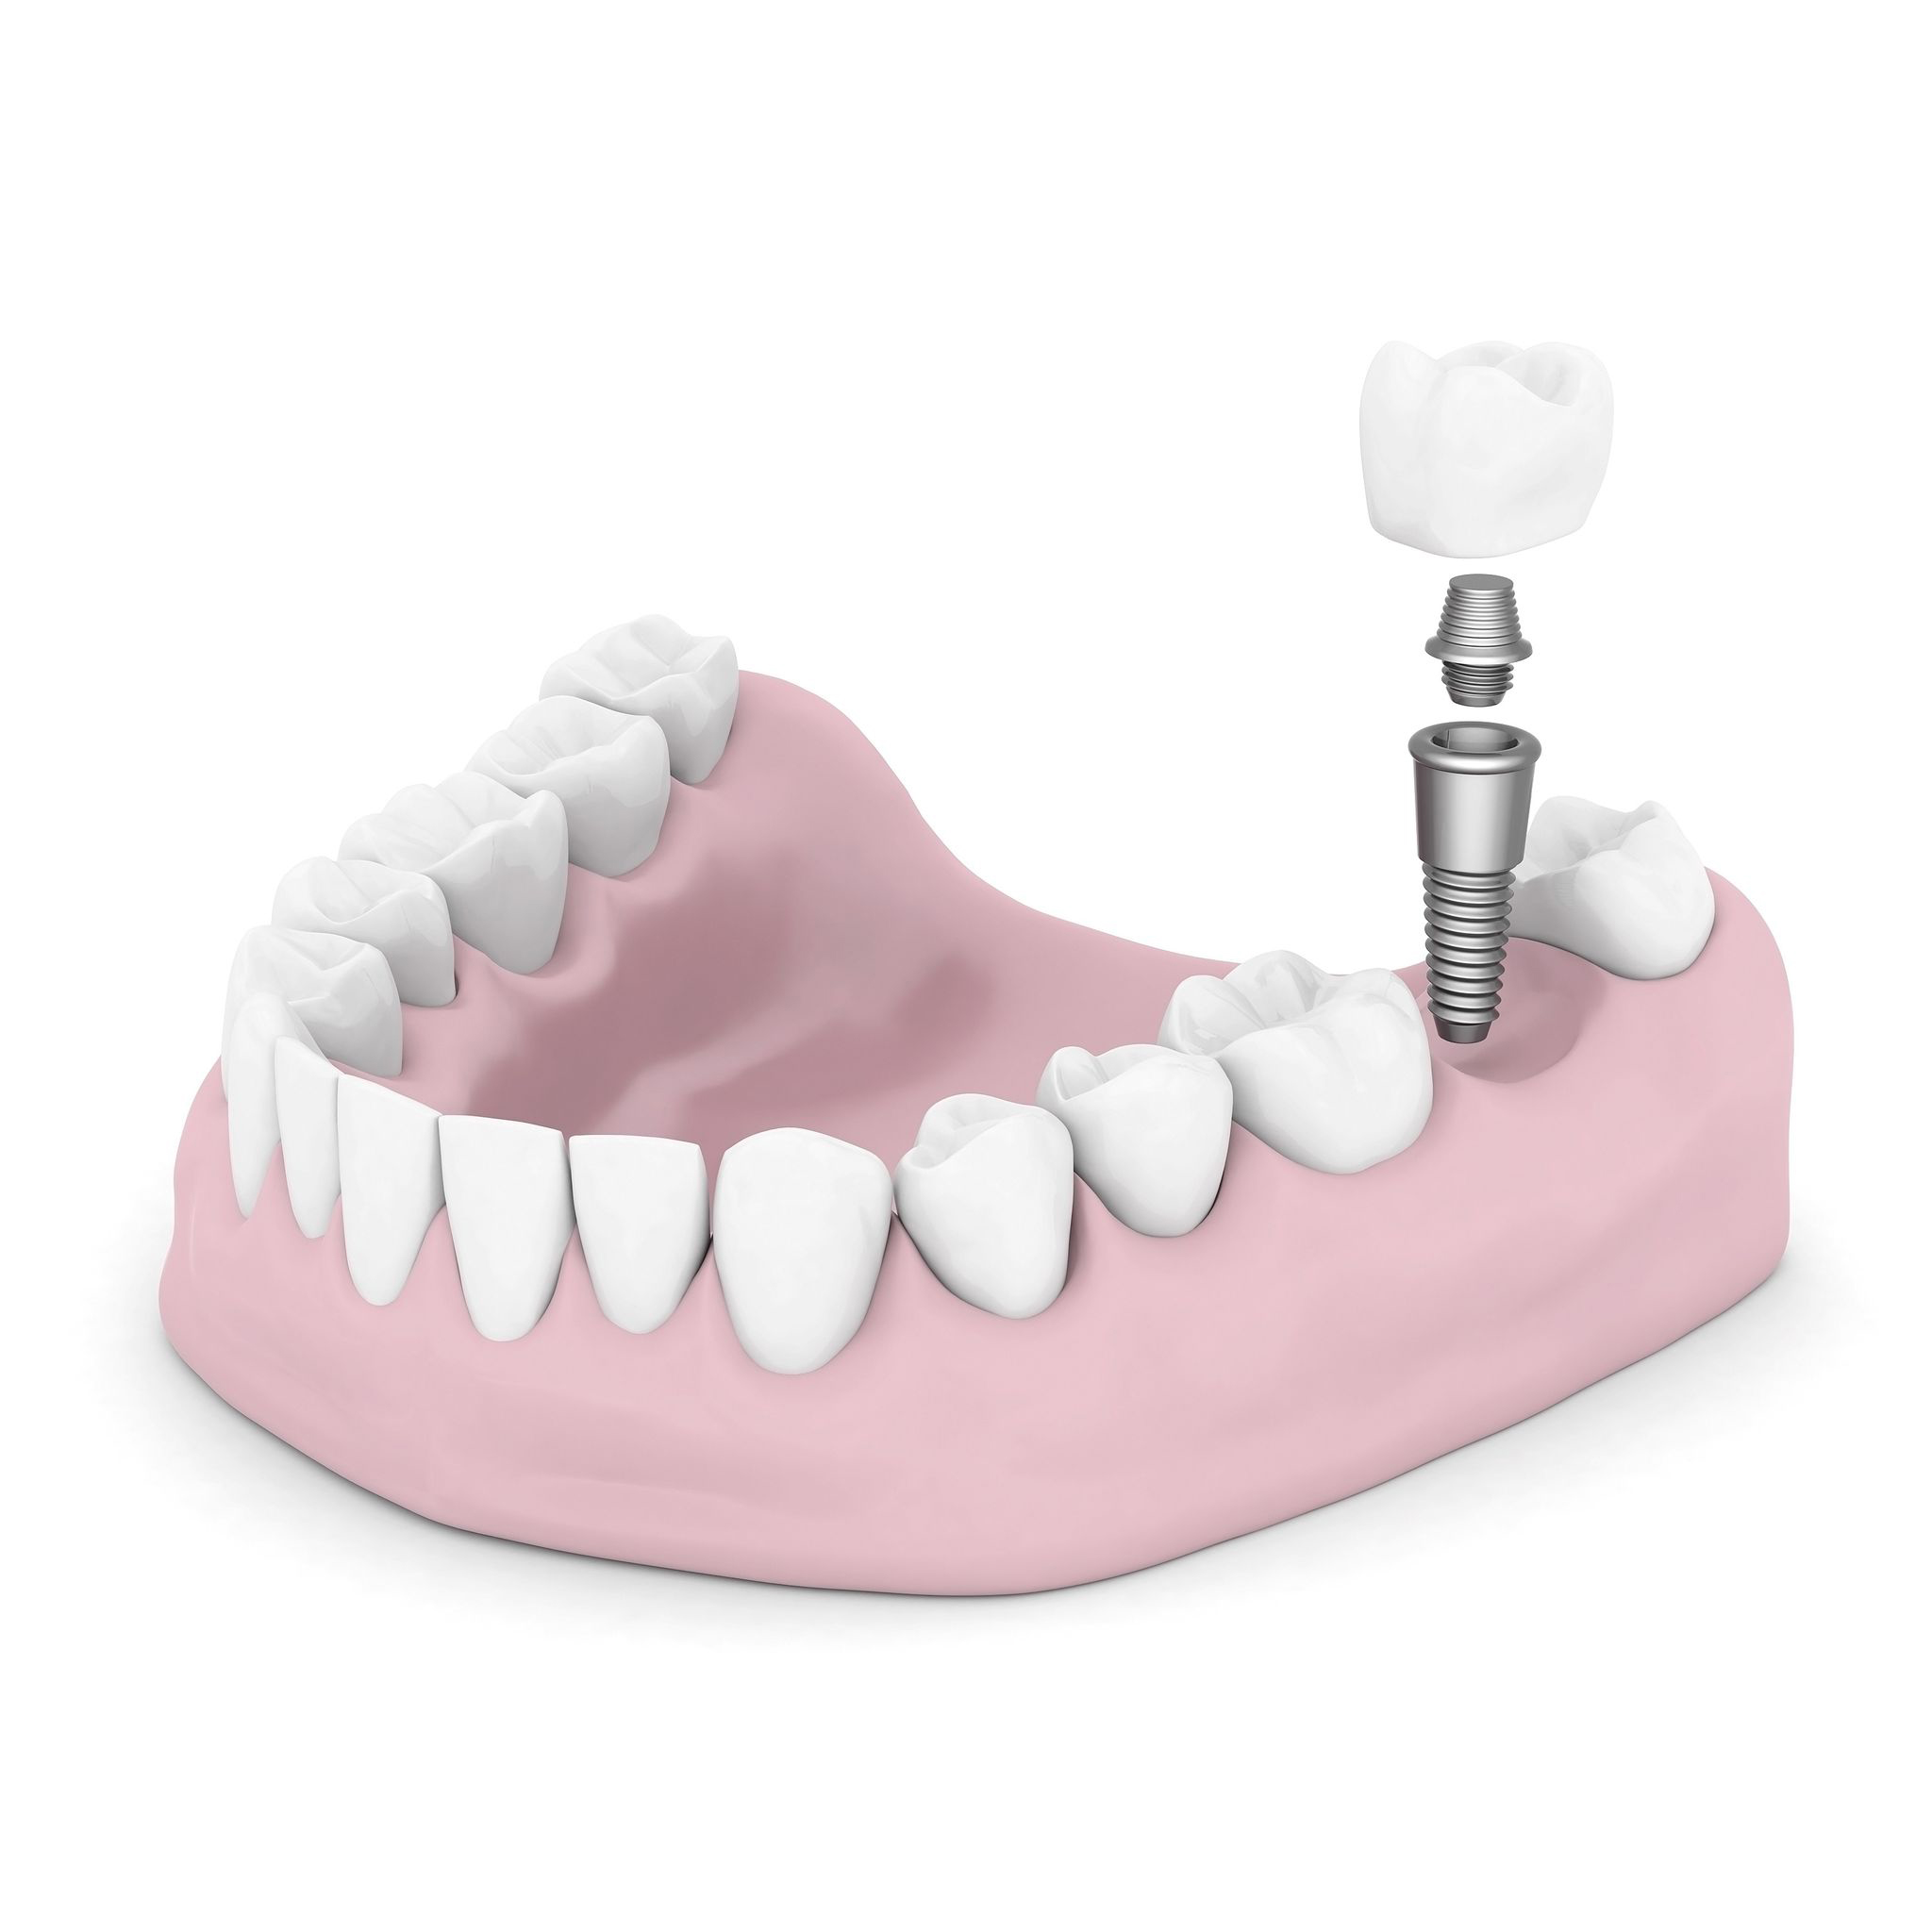 Where can I get 91701 Dental Implants?